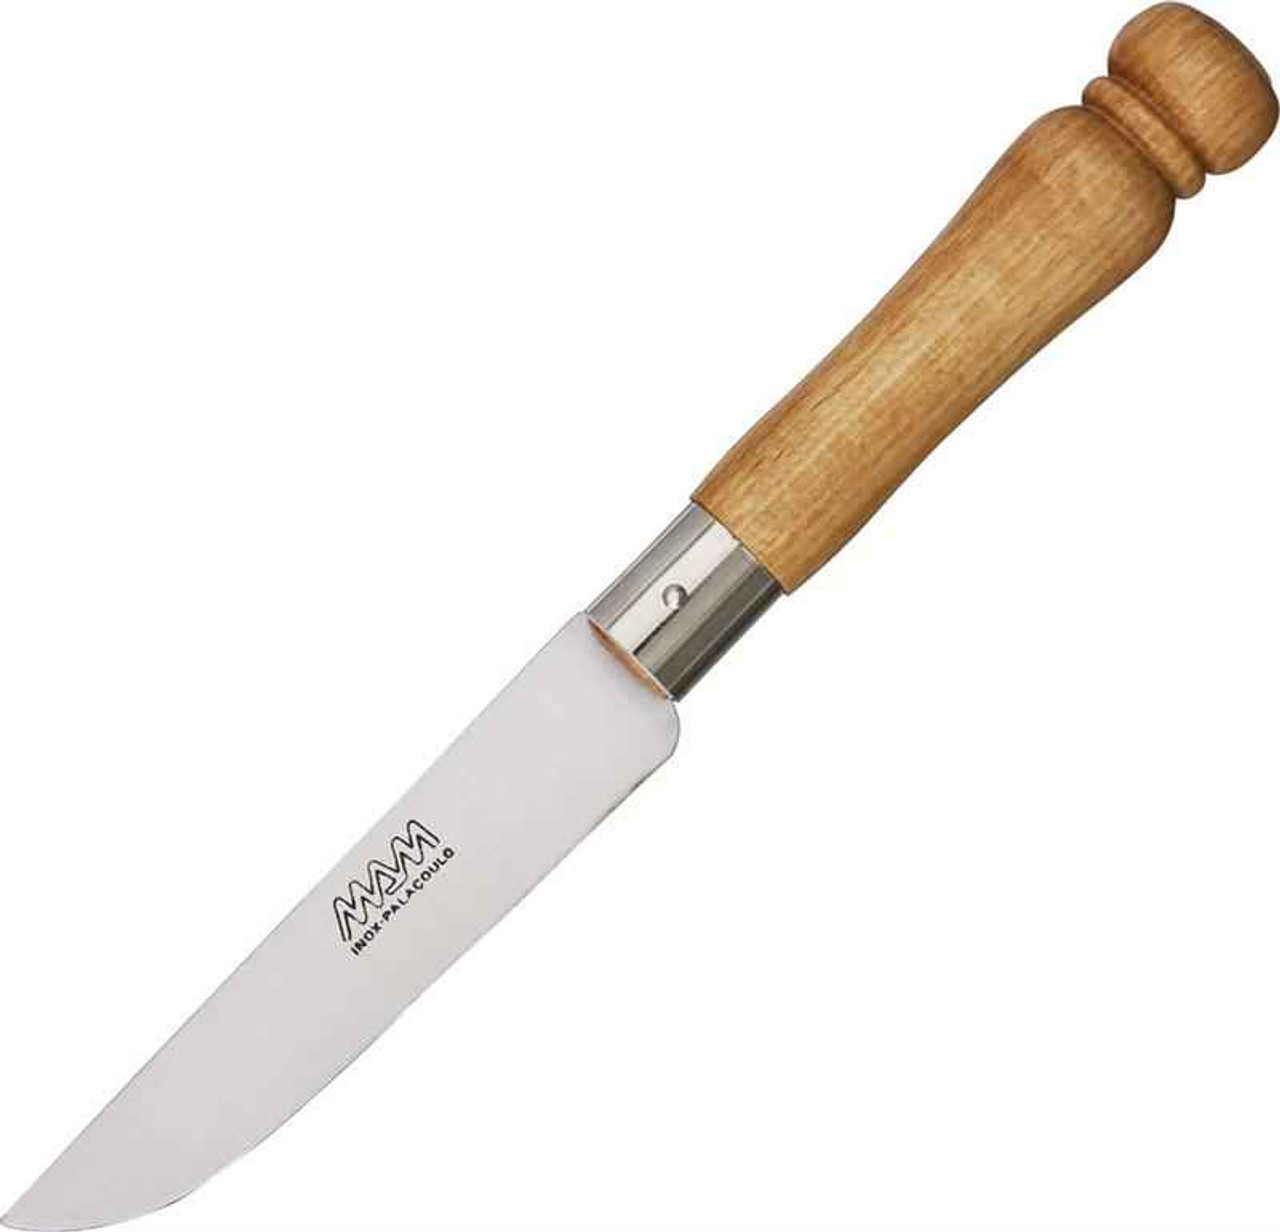 MAM Kitchen Knife, 3 7/8" Clip Point Stainless Blade